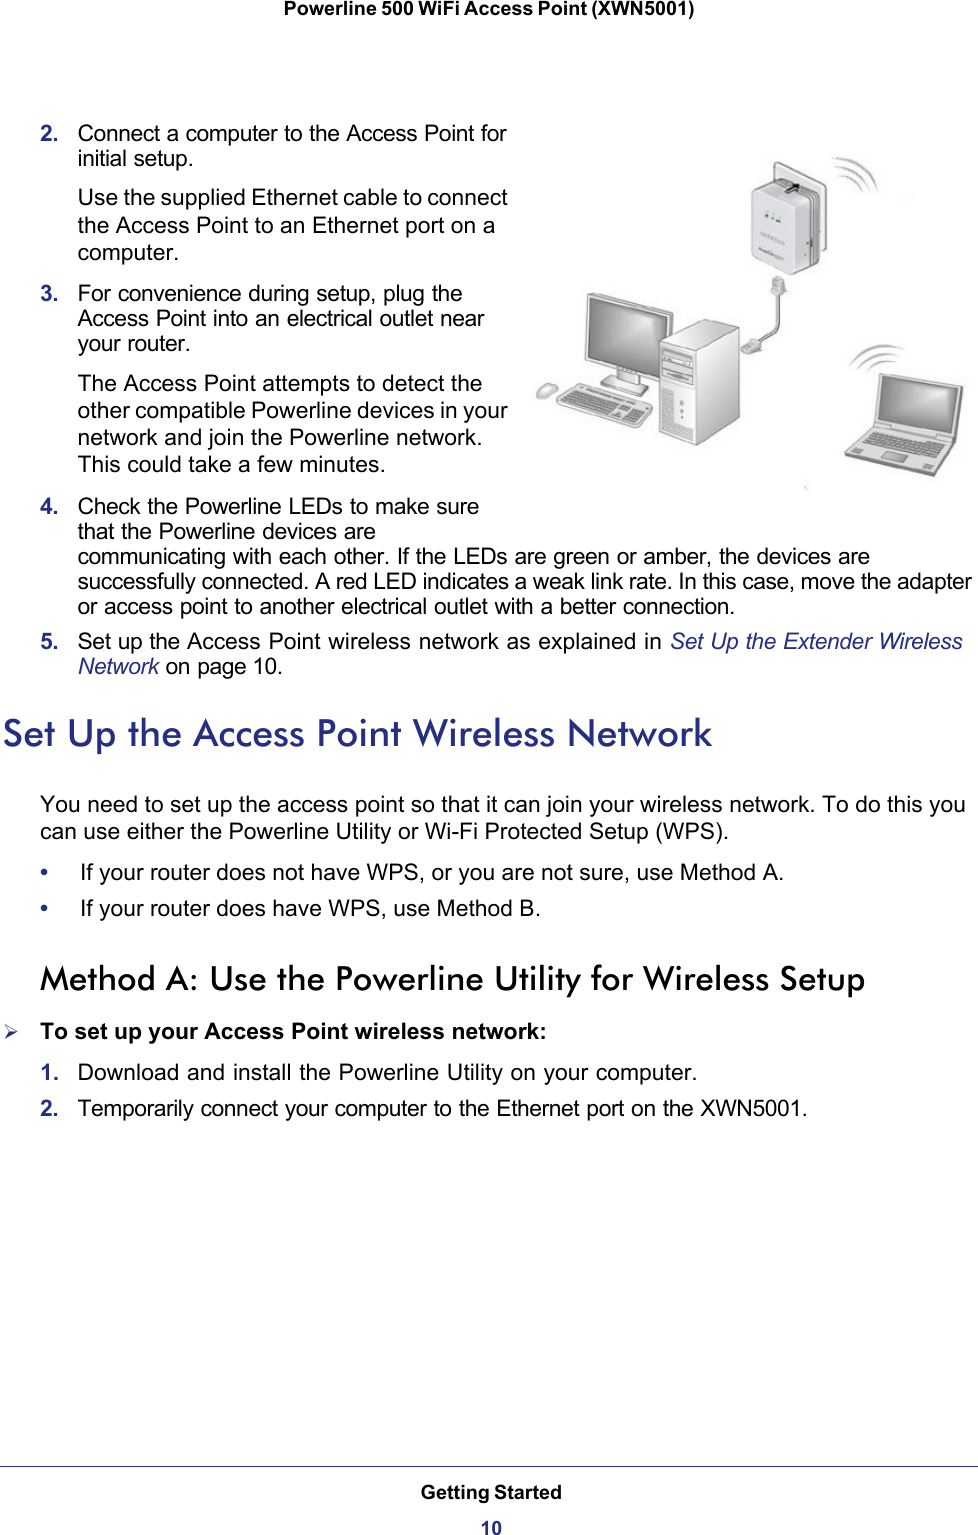 Getting Started10Powerline 500 WiFi Access Point (XWN5001) 2.  Connect a computer to the Access Point for initial setup.Use the supplied Ethernet cable to connect the Access Point to an Ethernet port on a computer.3.  For convenience during setup, plug the Access Point into an electrical outlet near your router. The Access Point attempts to detect the other compatible Powerline devices in your network and join the Powerline network. This could take a few minutes.4.  Check the Powerline LEDs to make sure that the Powerline devices are communicating with each other. If the LEDs are green or amber, the devices are successfully connected. A red LED indicates a weak link rate. In this case, move the adapter or access point to another electrical outlet with a better connection.5.  Set up the Access Point wireless network as explained in Set Up the Extender Wireless Network on page 10.Set Up the Access Point Wireless NetworkYou need to set up the access point so that it can join your wireless network. To do this you can use either the Powerline Utility or Wi-Fi Protected Setup (WPS).•     If your router does not have WPS, or you are not sure, use Method A.•     If your router does have WPS, use Method B.Method A: Use the Powerline Utility for Wireless SetupTo set up your Access Point wireless network:1.  Download and install the Powerline Utility on your computer. 2.  Temporarily connect your computer to the Ethernet port on the XWN5001. 